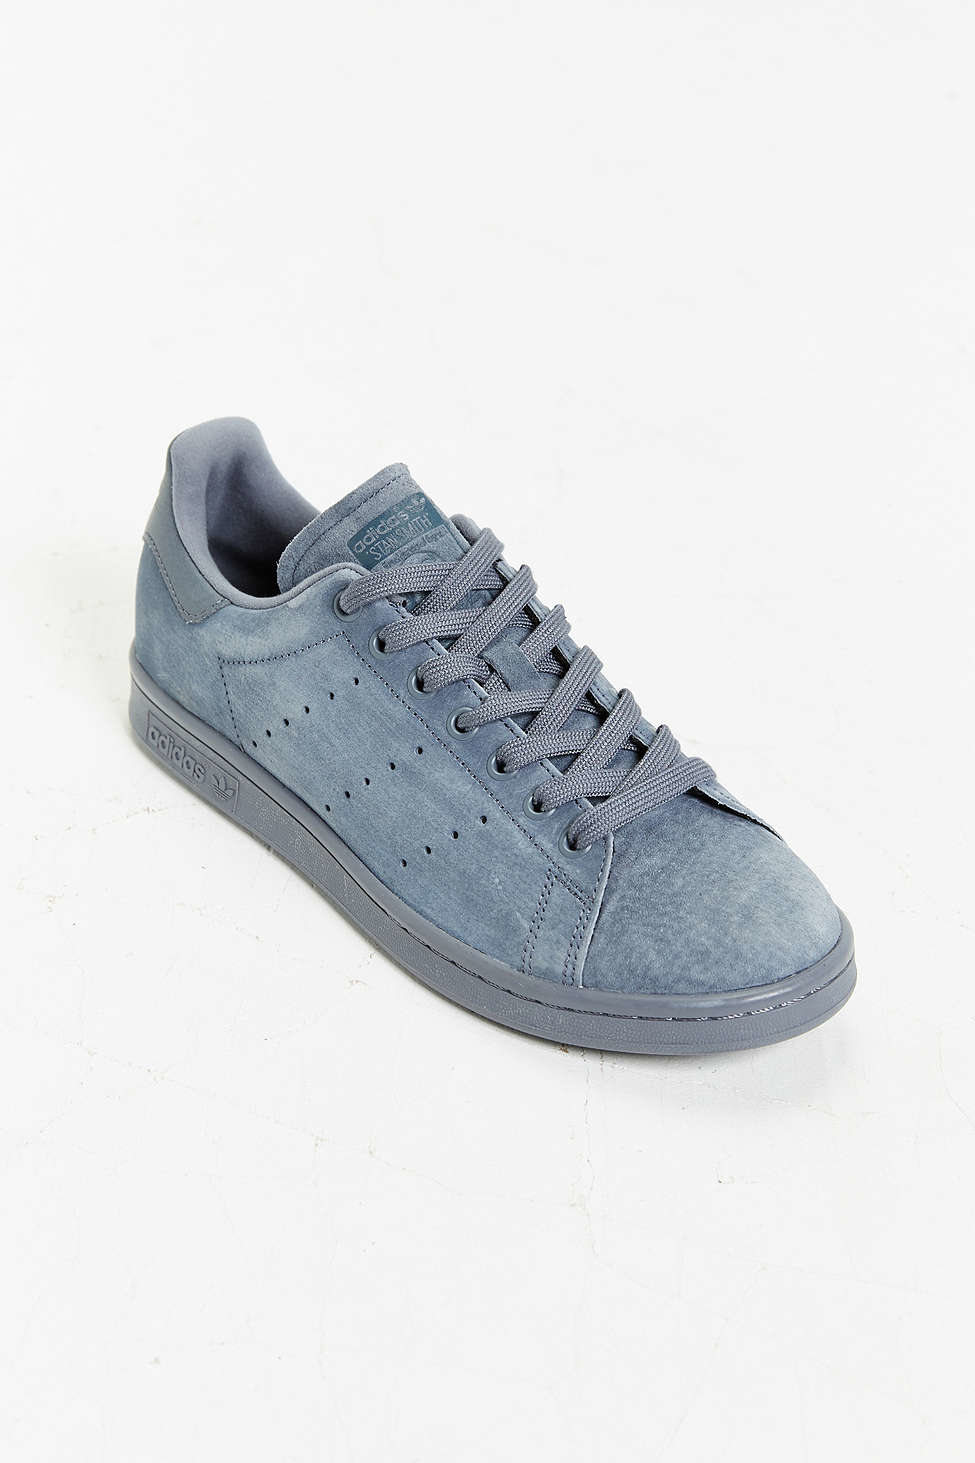 stan smith shoes suede